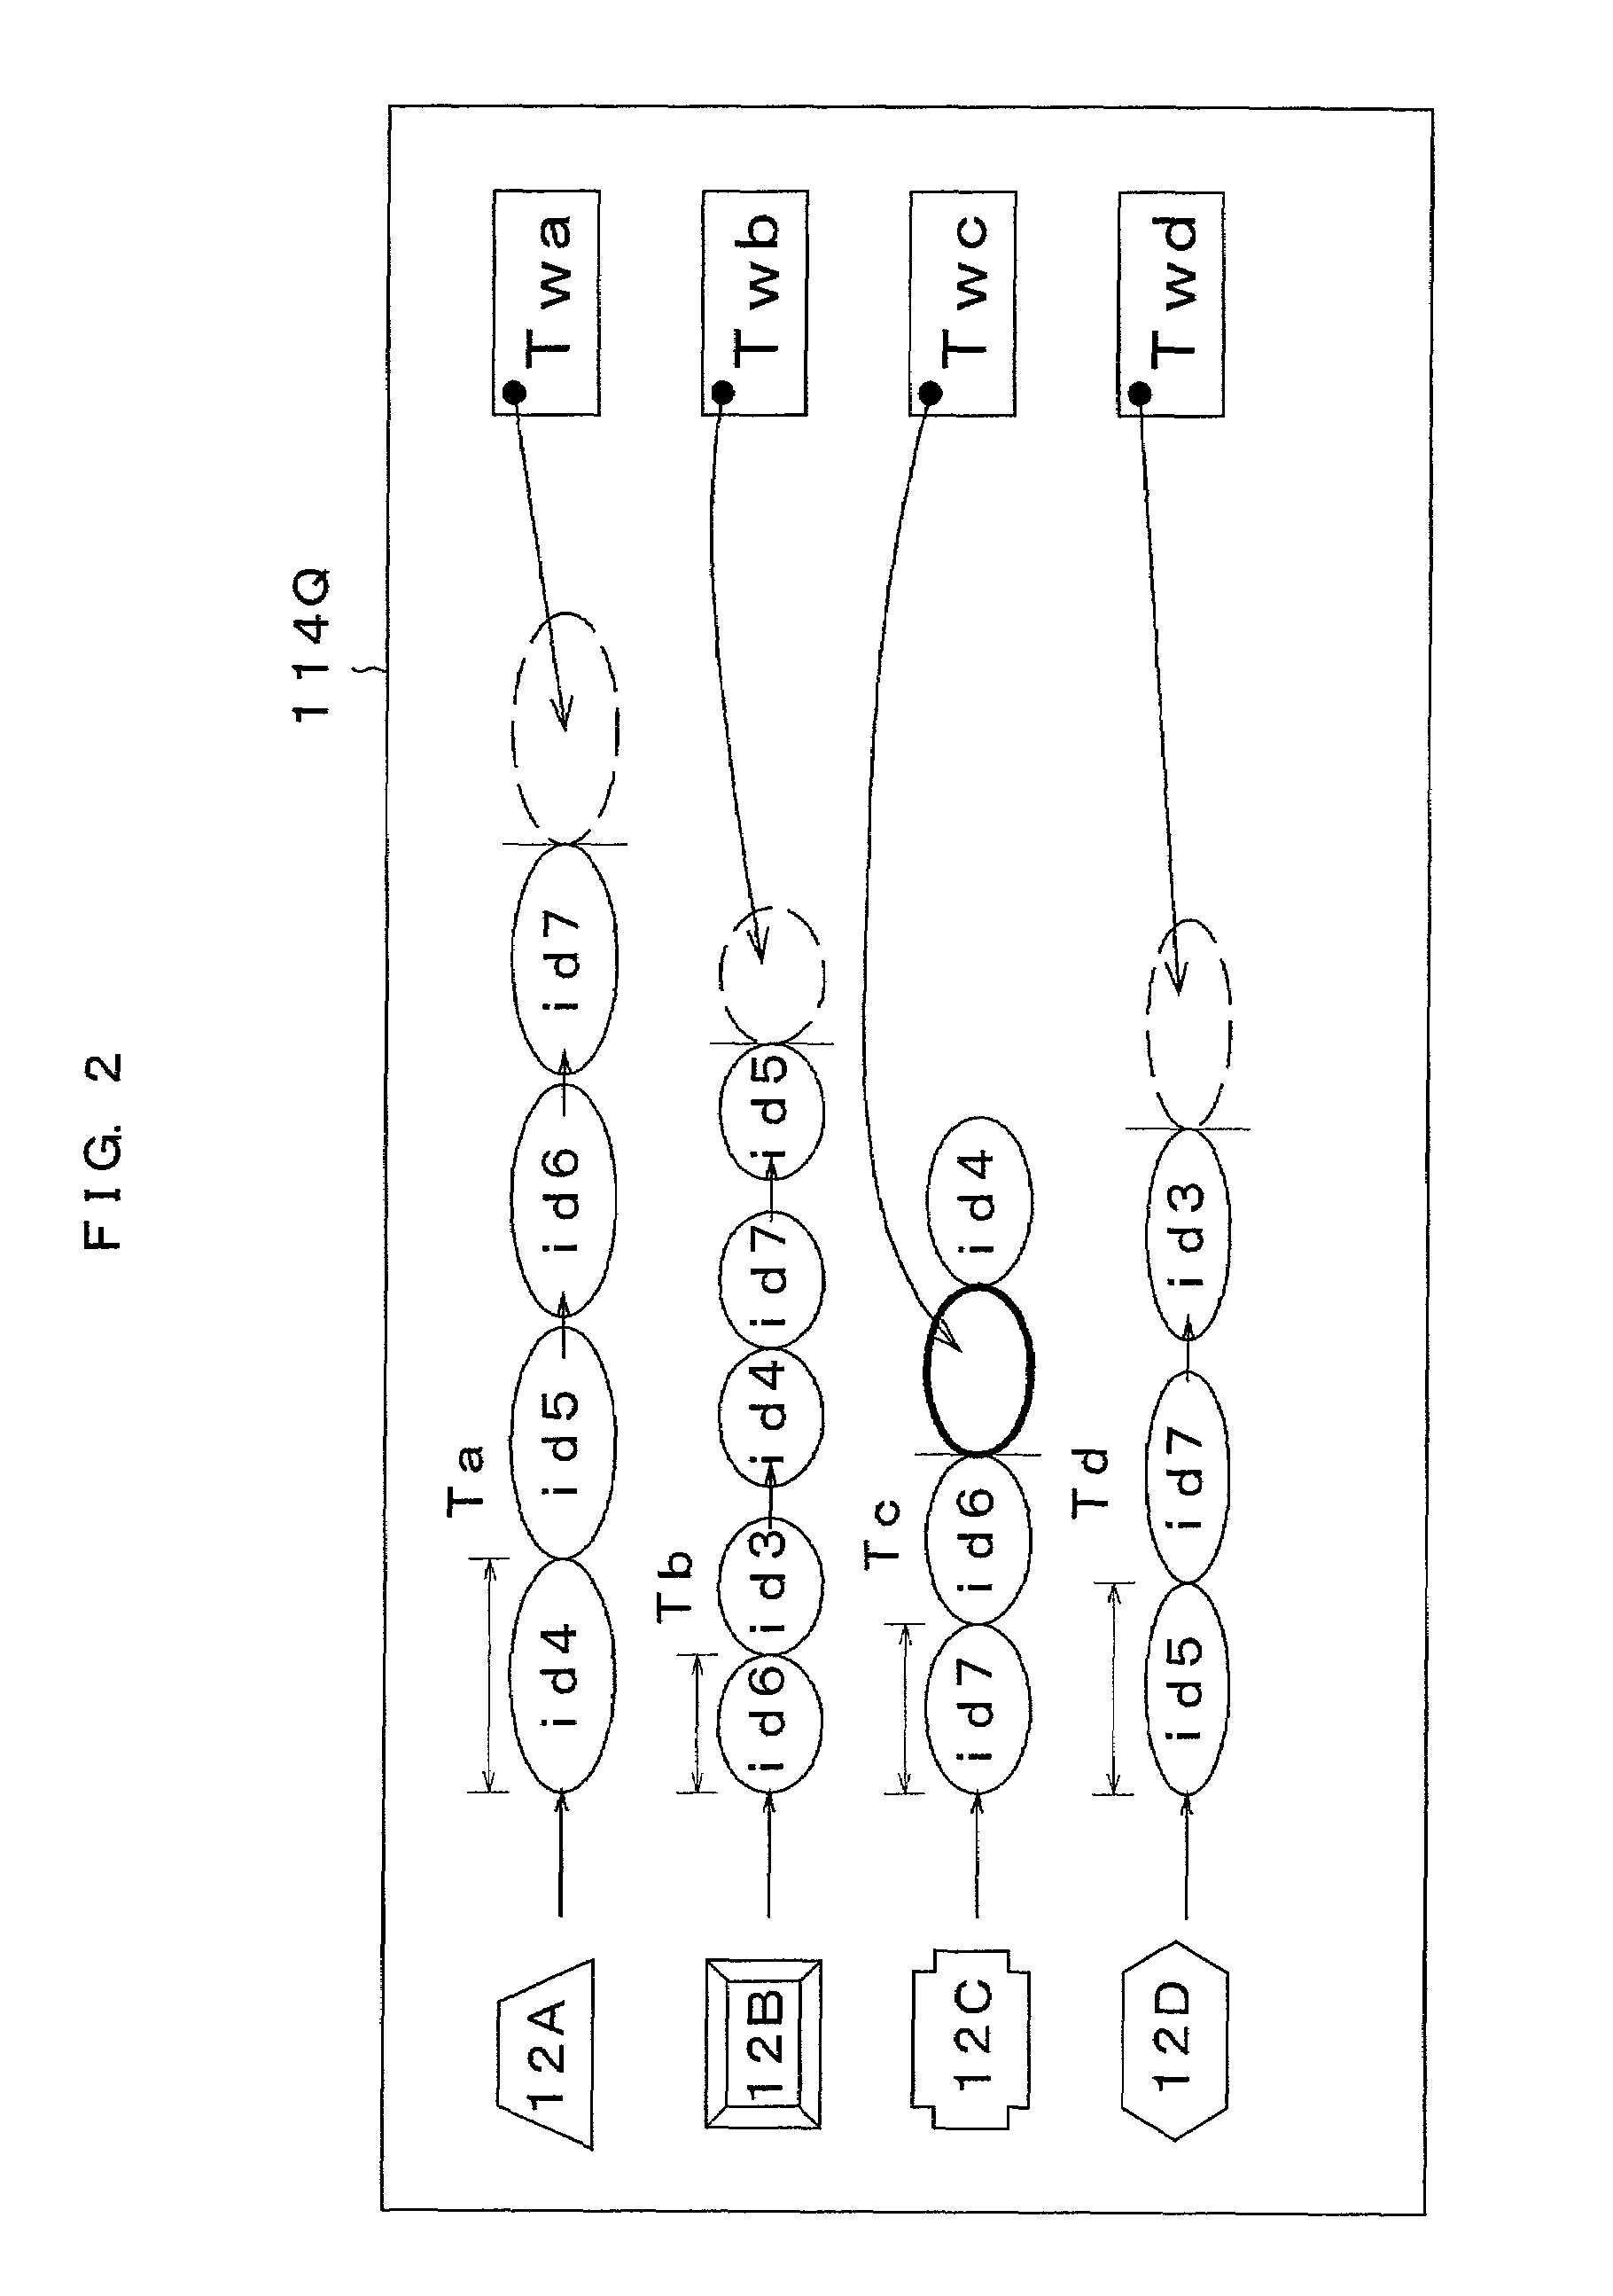 System and method for scheduling medical examinations utilizing queues and providing medical examination route guide information to the scheduled examinations